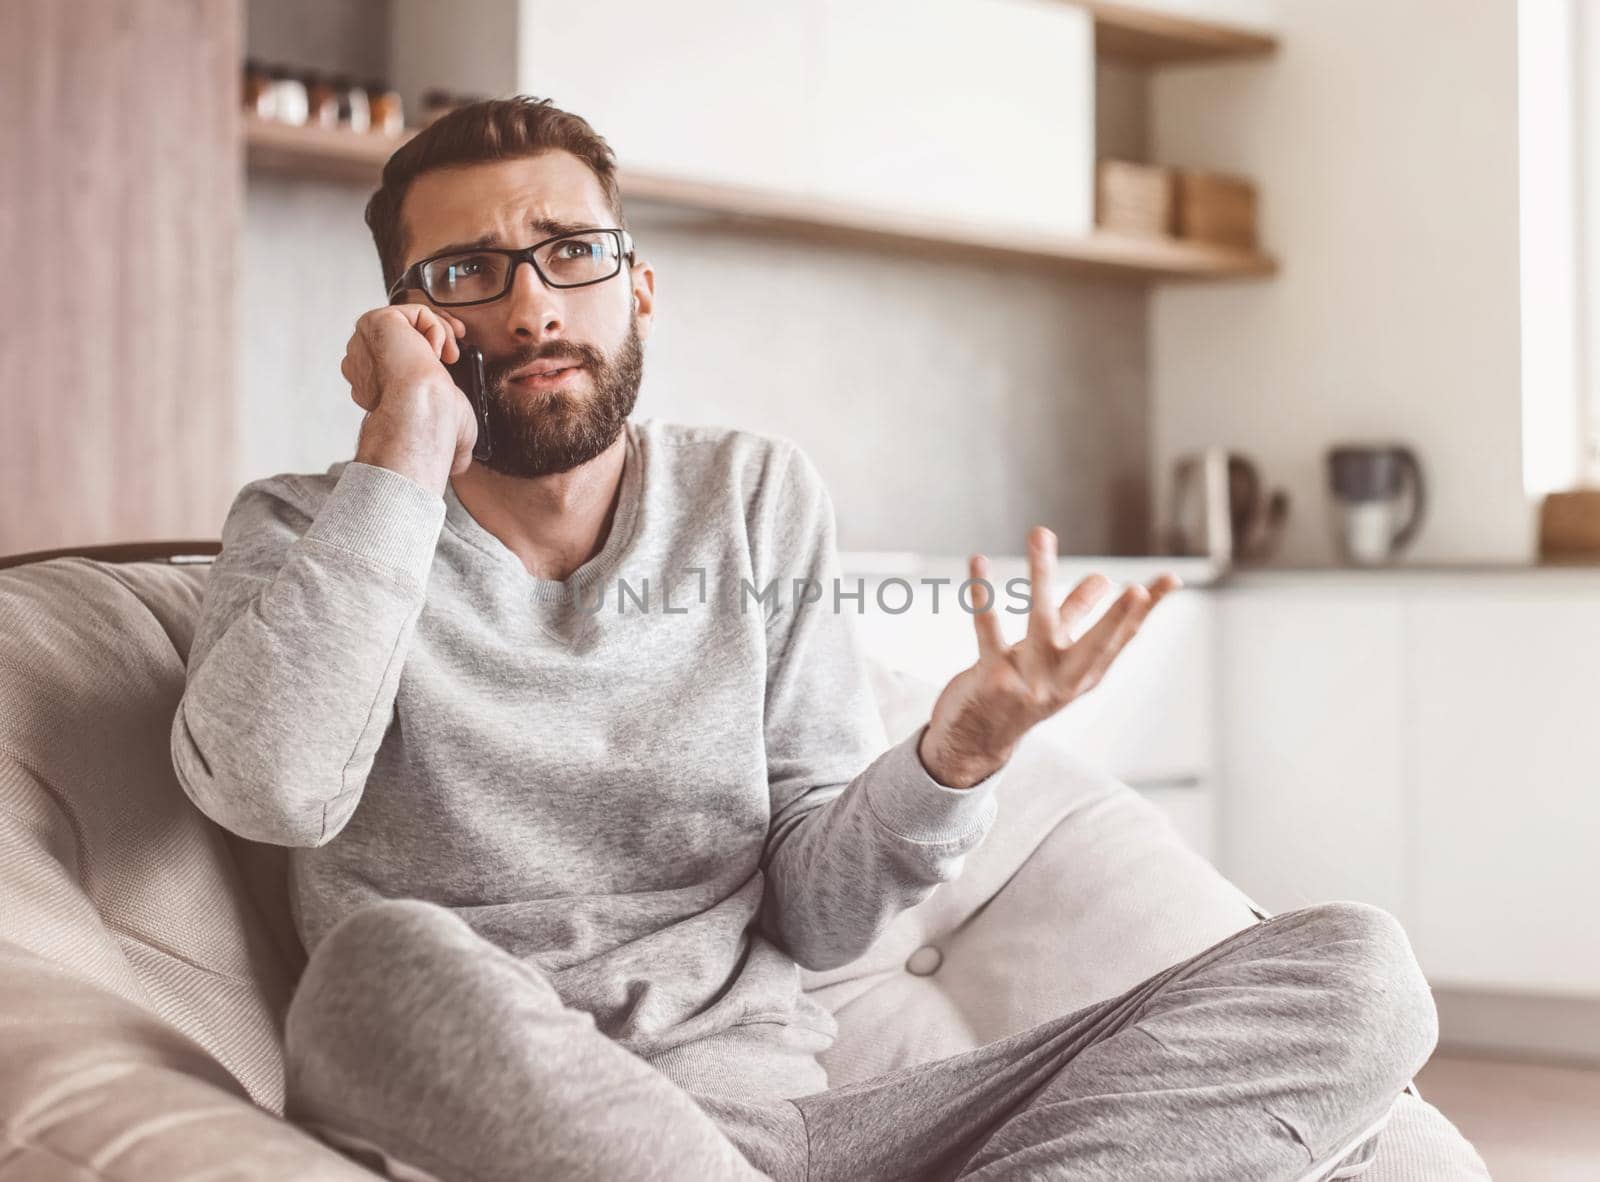 cheerful man talking on a mobile phone sitting in a comfortable chair. photo with copy space